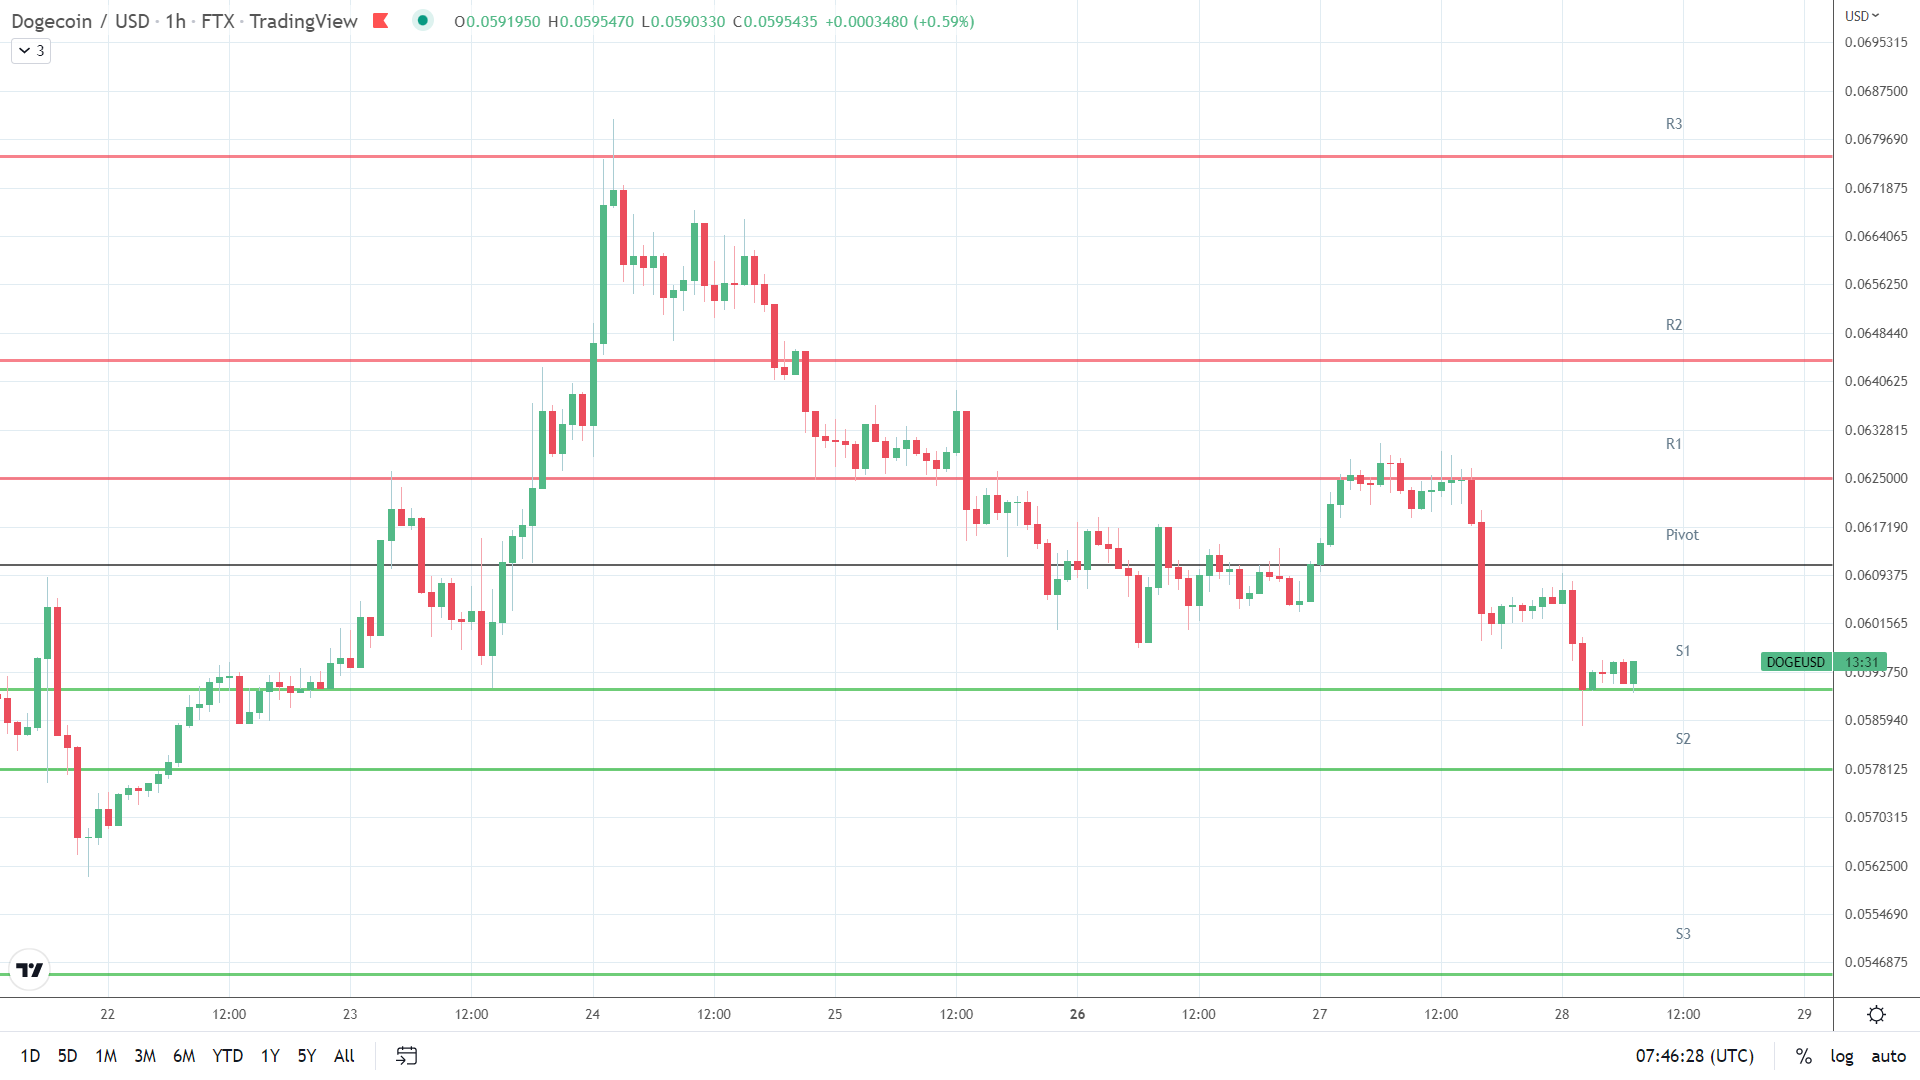 DOGE support levels in play below the pivot.